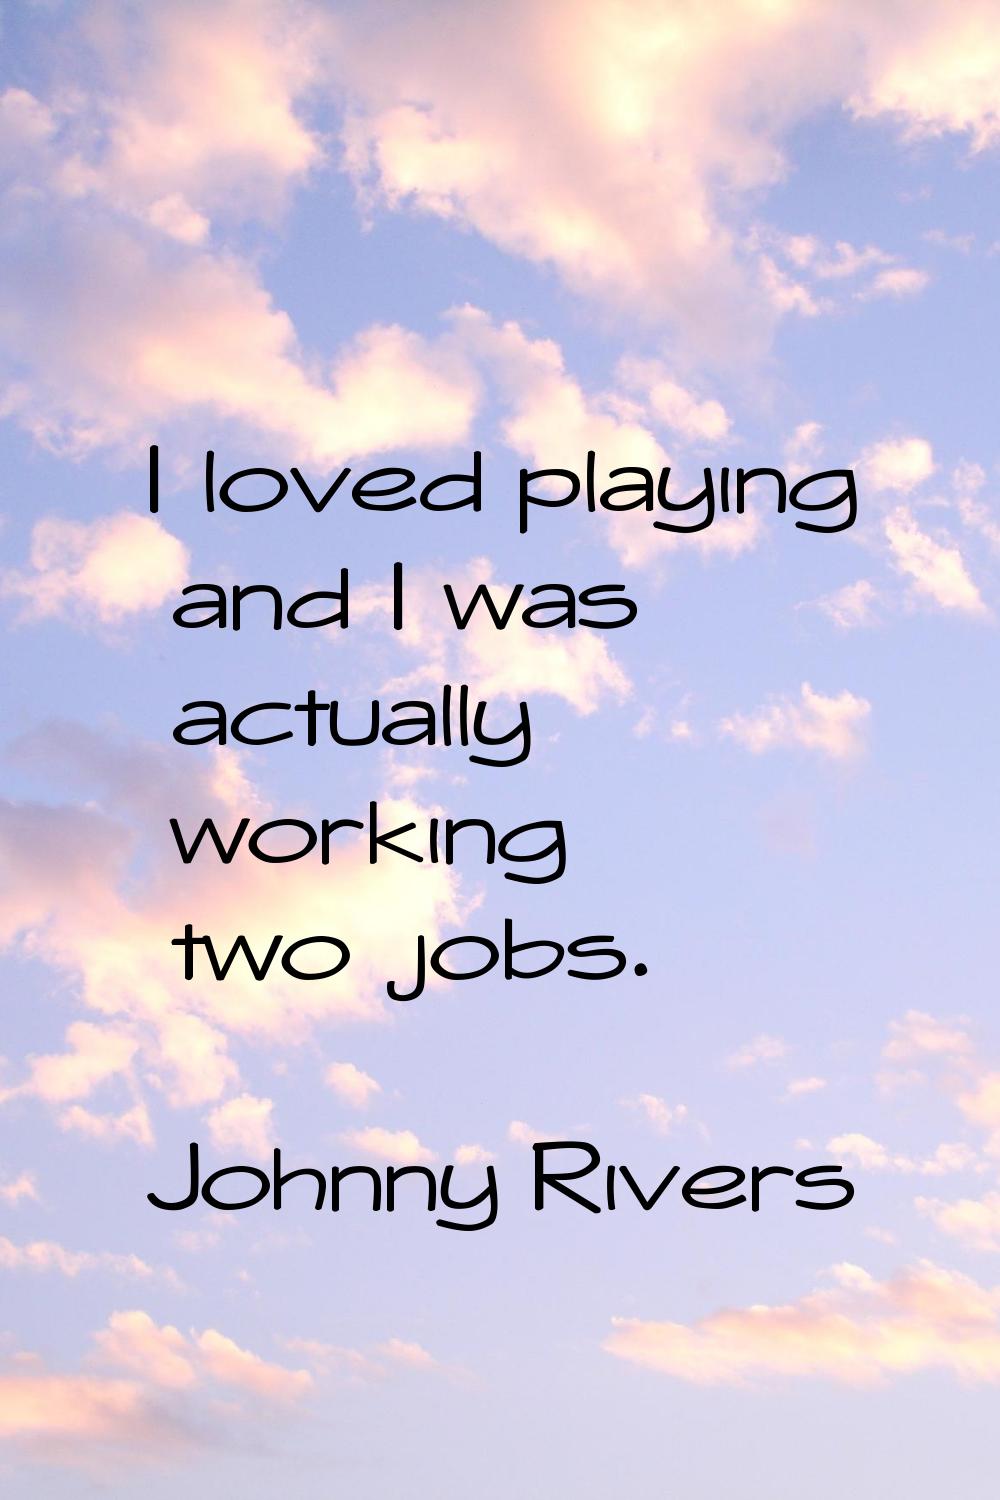 I loved playing and I was actually working two jobs.